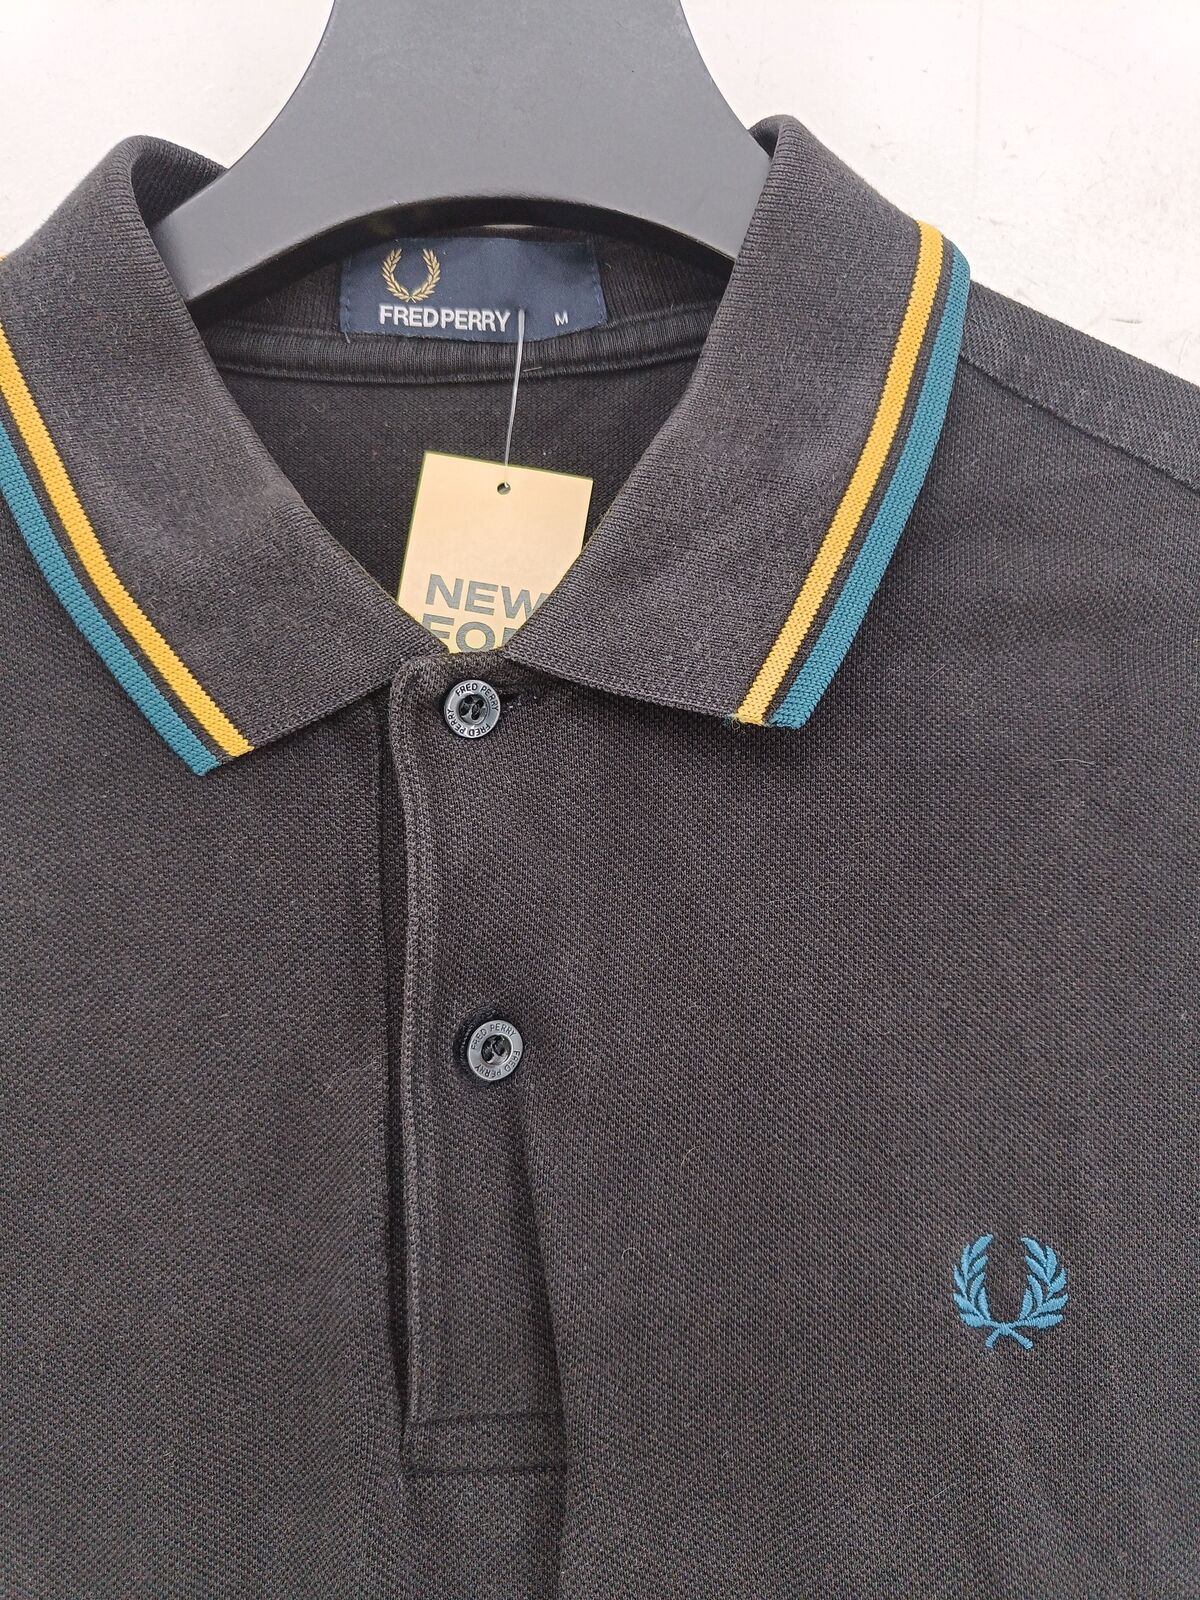 Fred Perry Men's Polo M Black 100% Cotton Basic - image 6